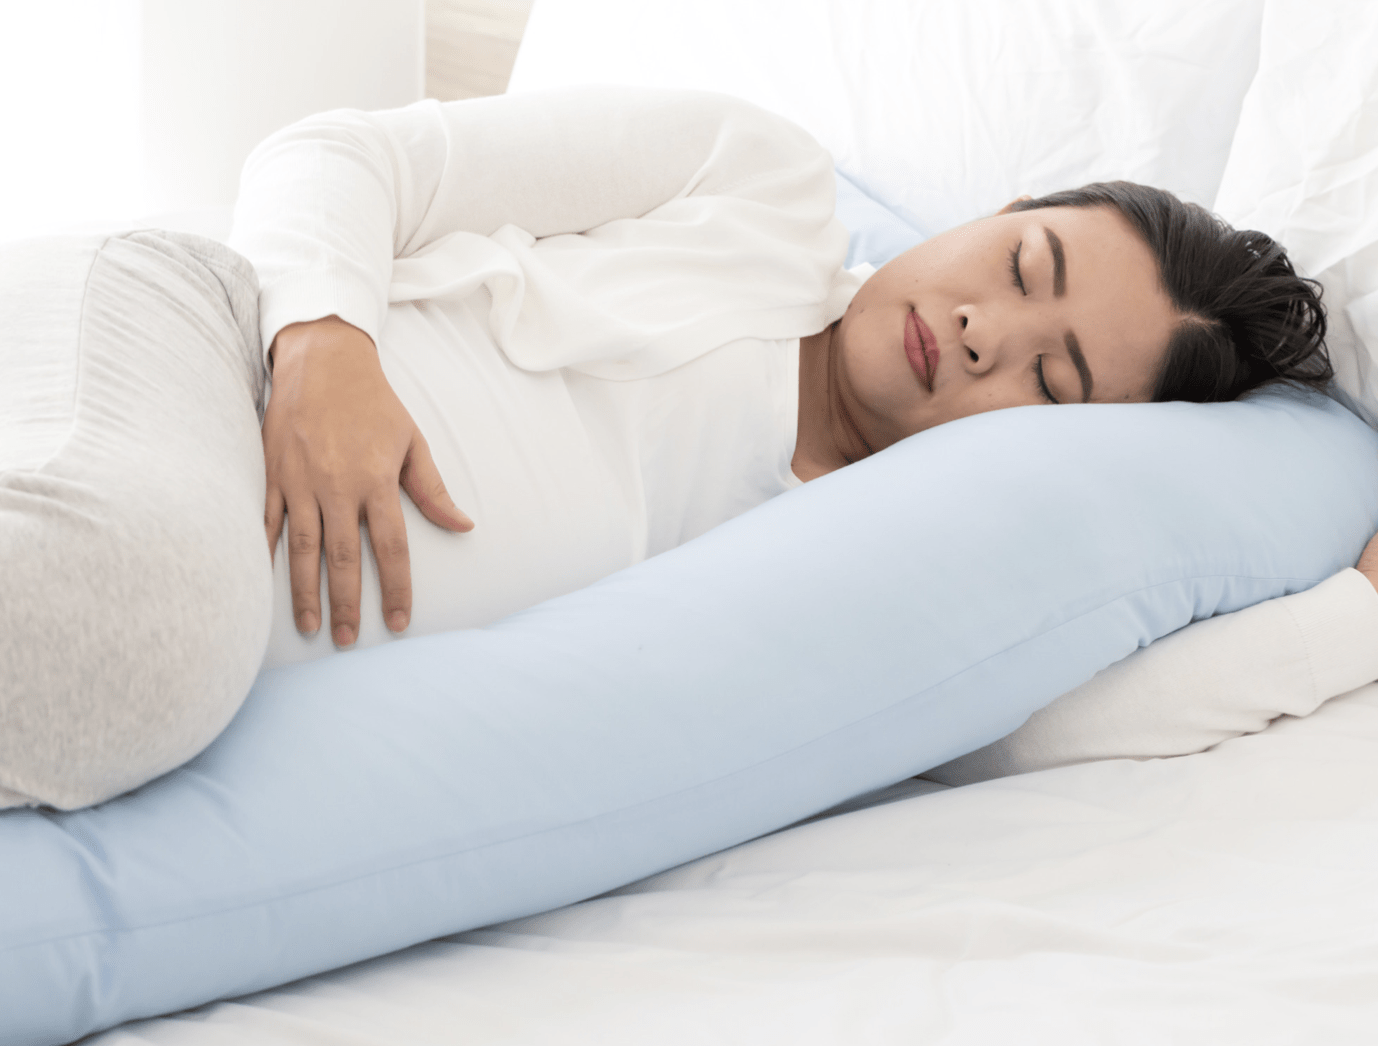 The Benefits of Sleeping with a Pillow Between Your Legs - Sleep Number